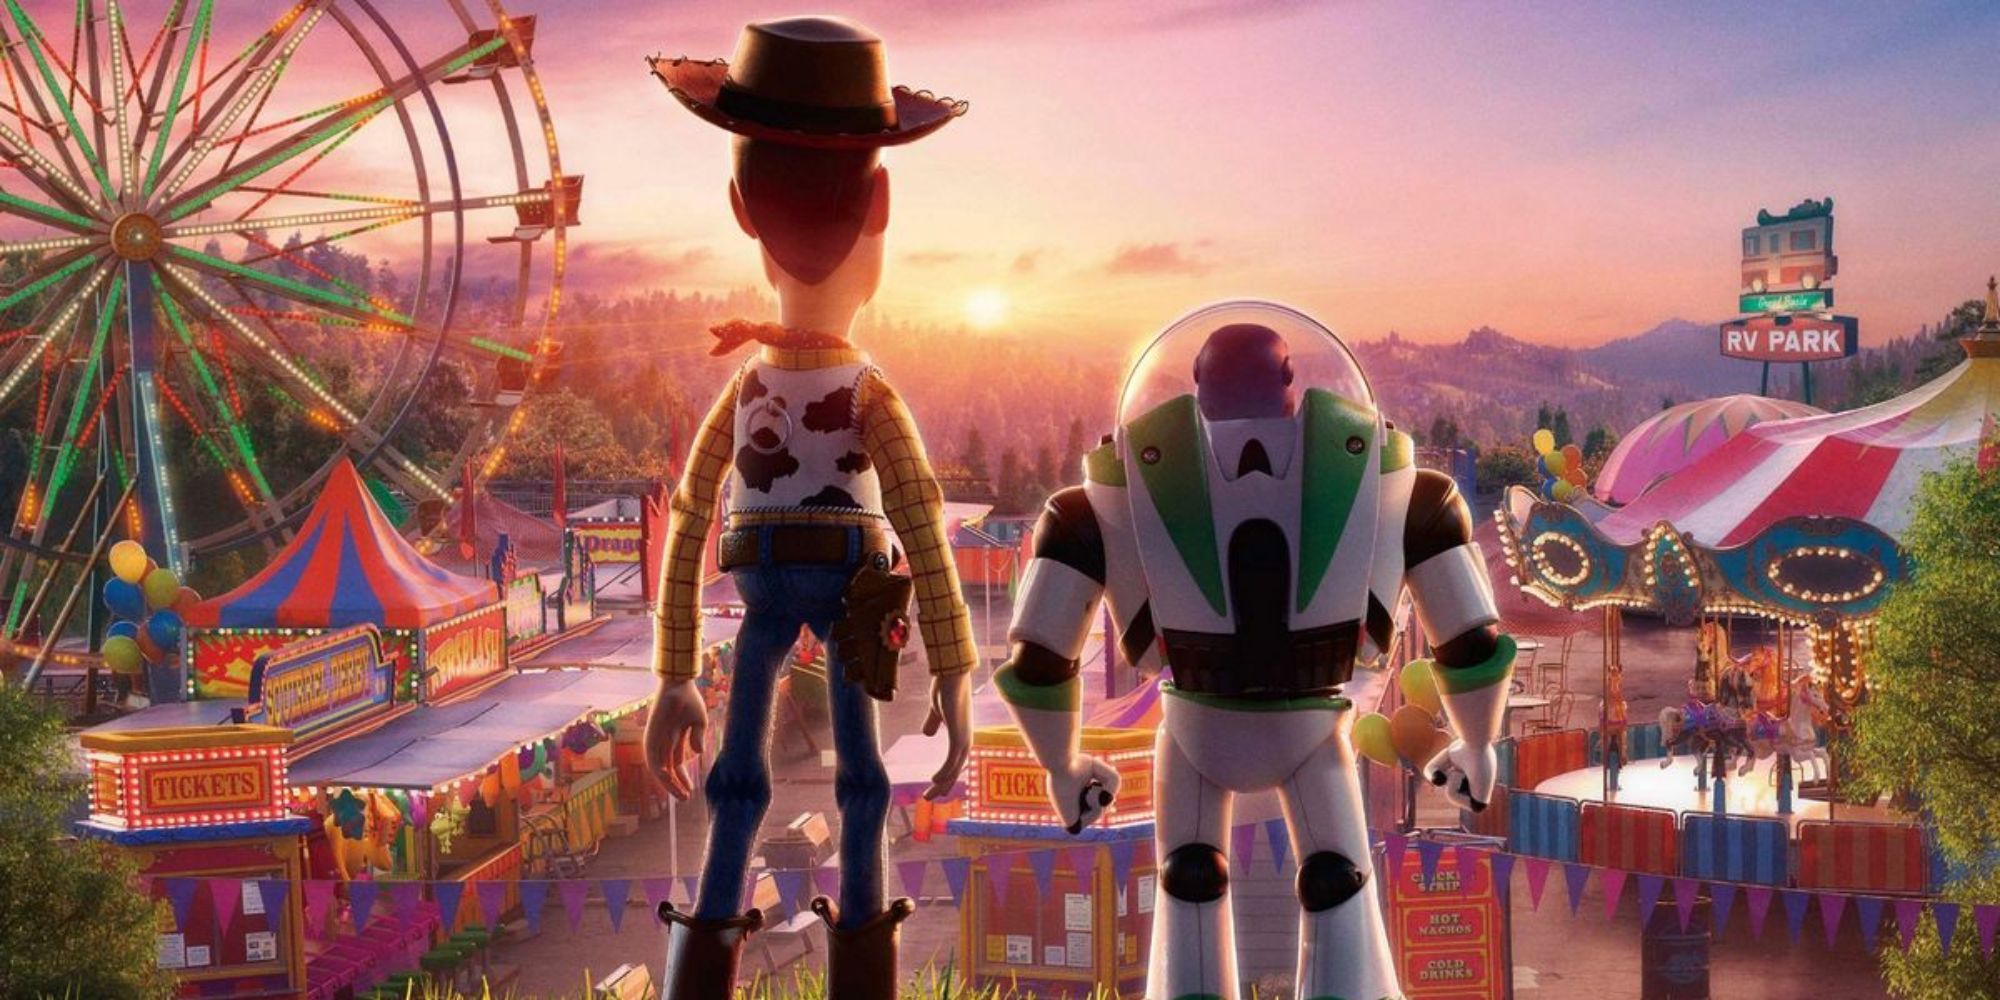 Woody and Buzz looking to a carnival in 'Toy Story 4' (2019) (1)